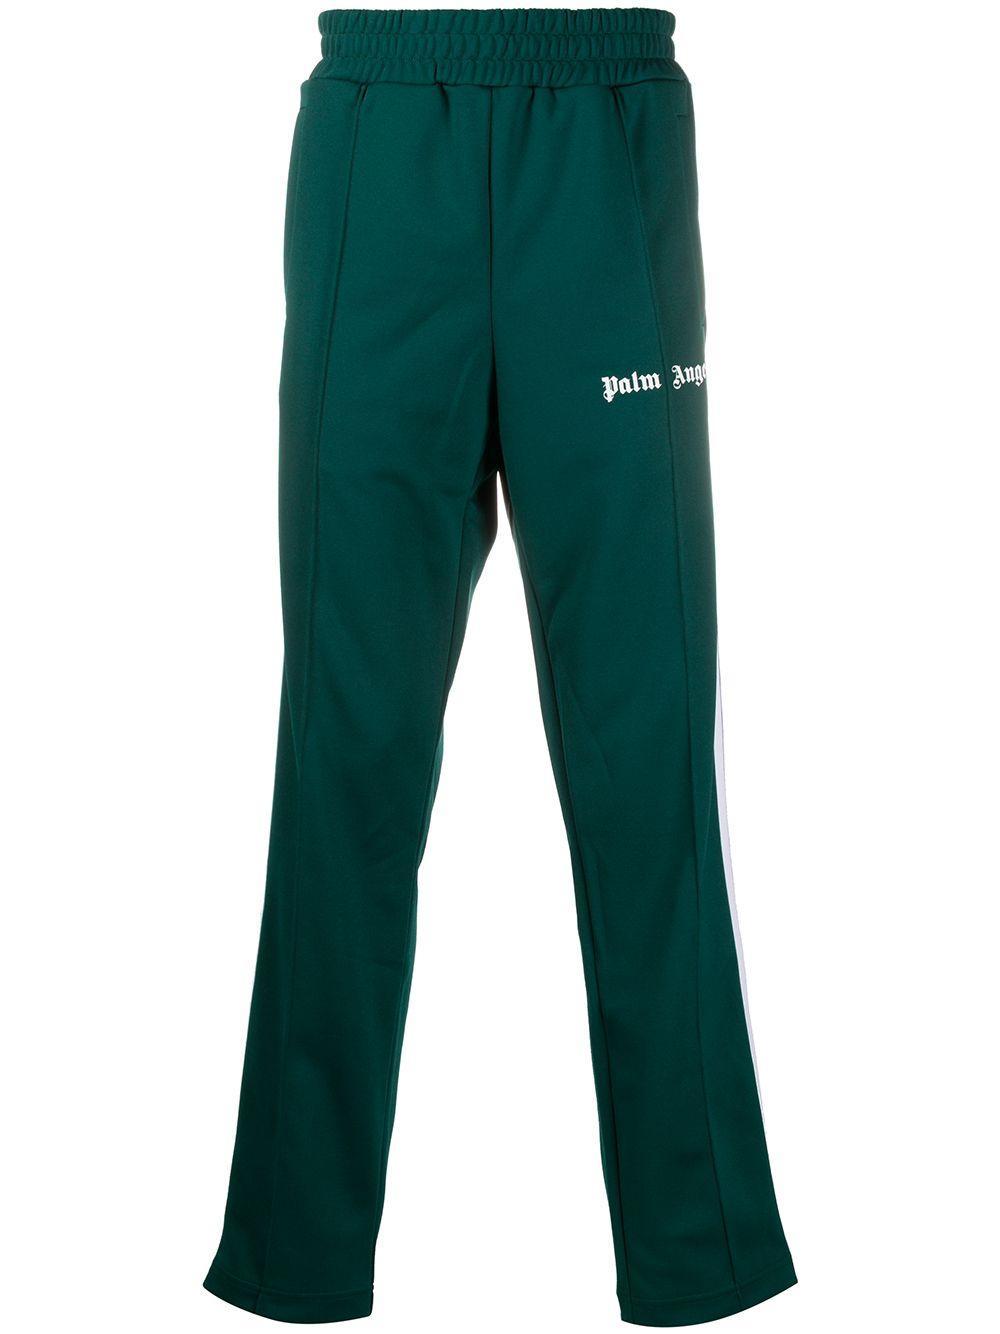 Palm Angels Side Stripe Track Pants in Green for Men - Lyst